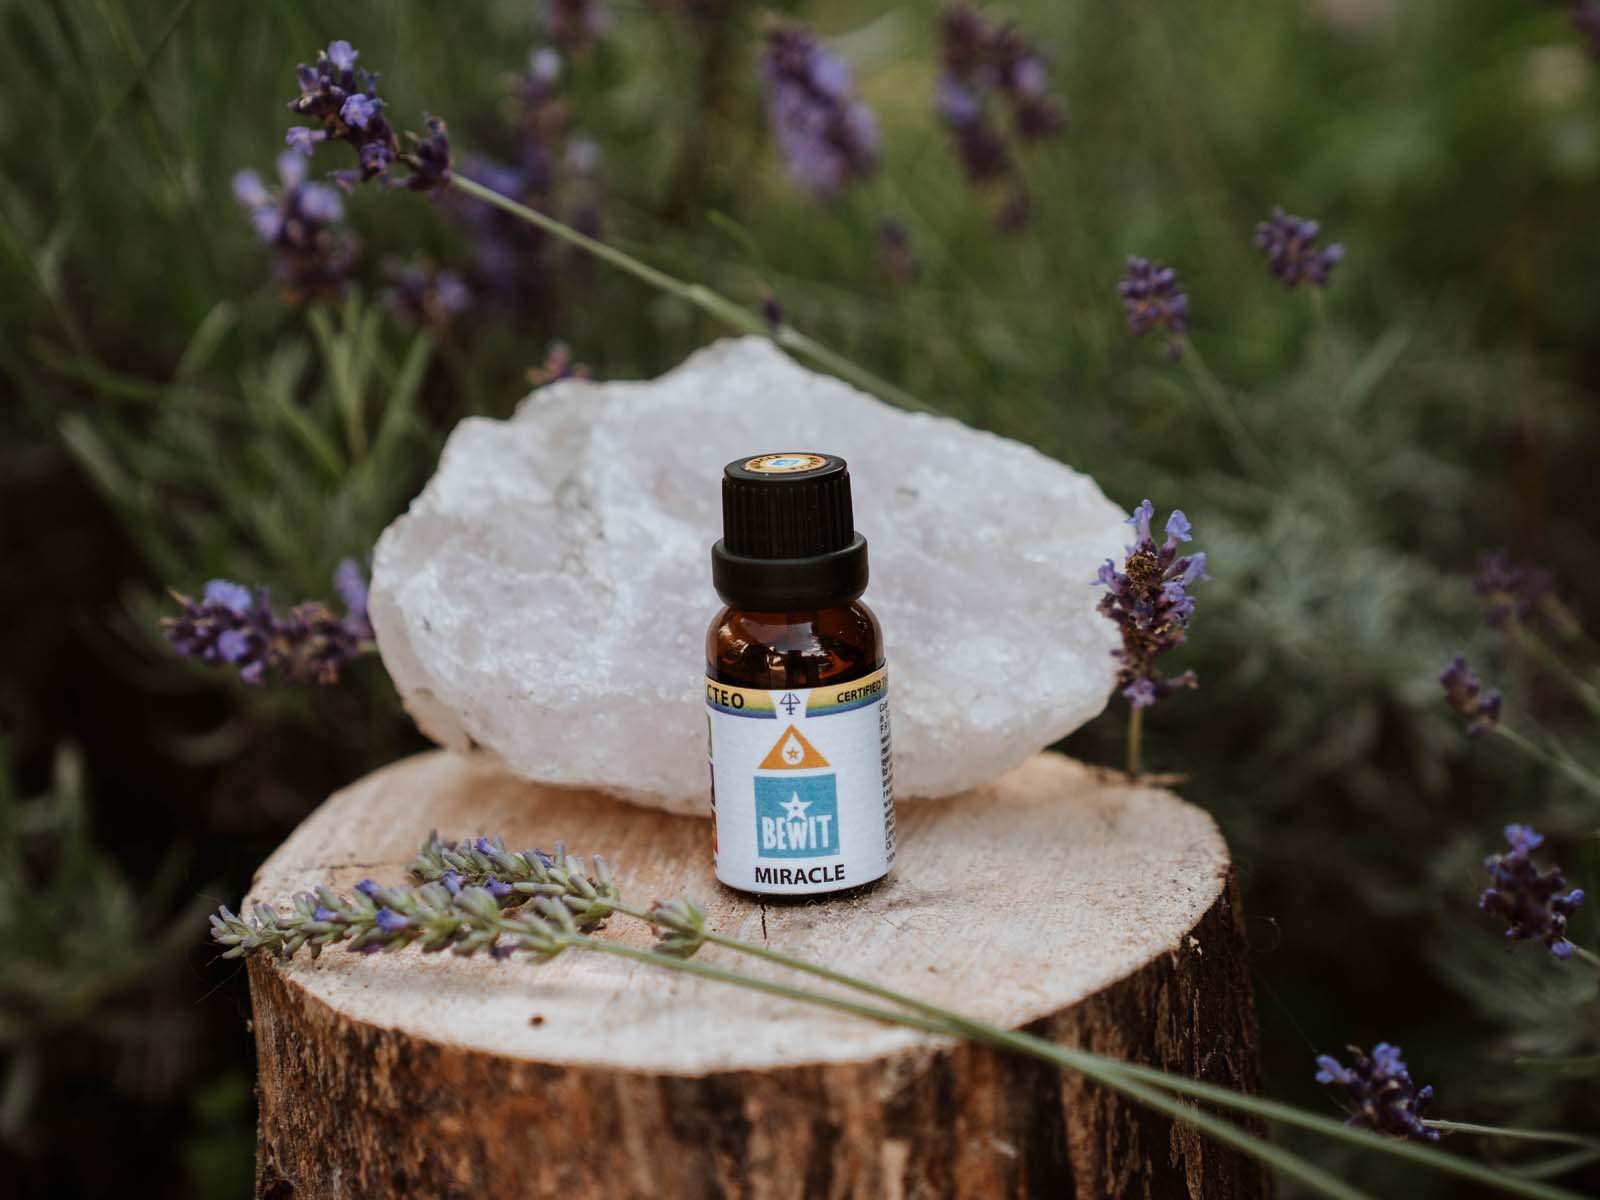 BEWIT MIRACLE - A unique blend of the essential oils - 5